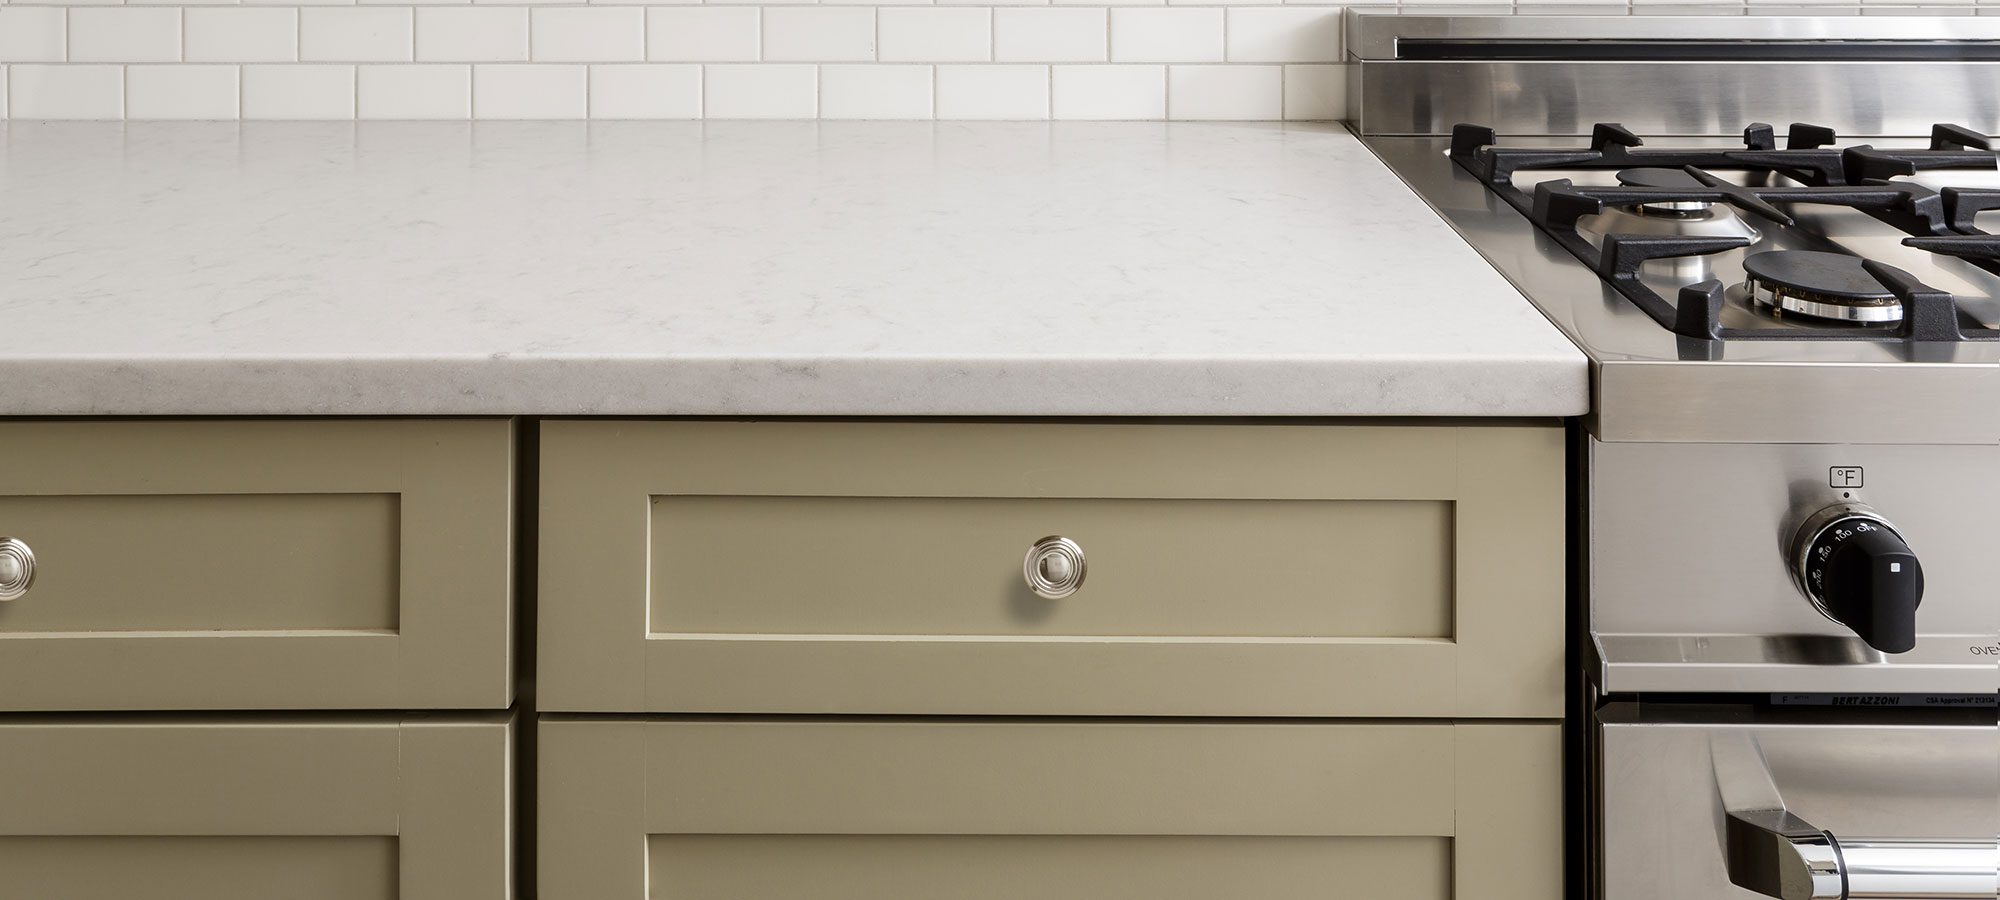 Marble Countertops with Subway Tile